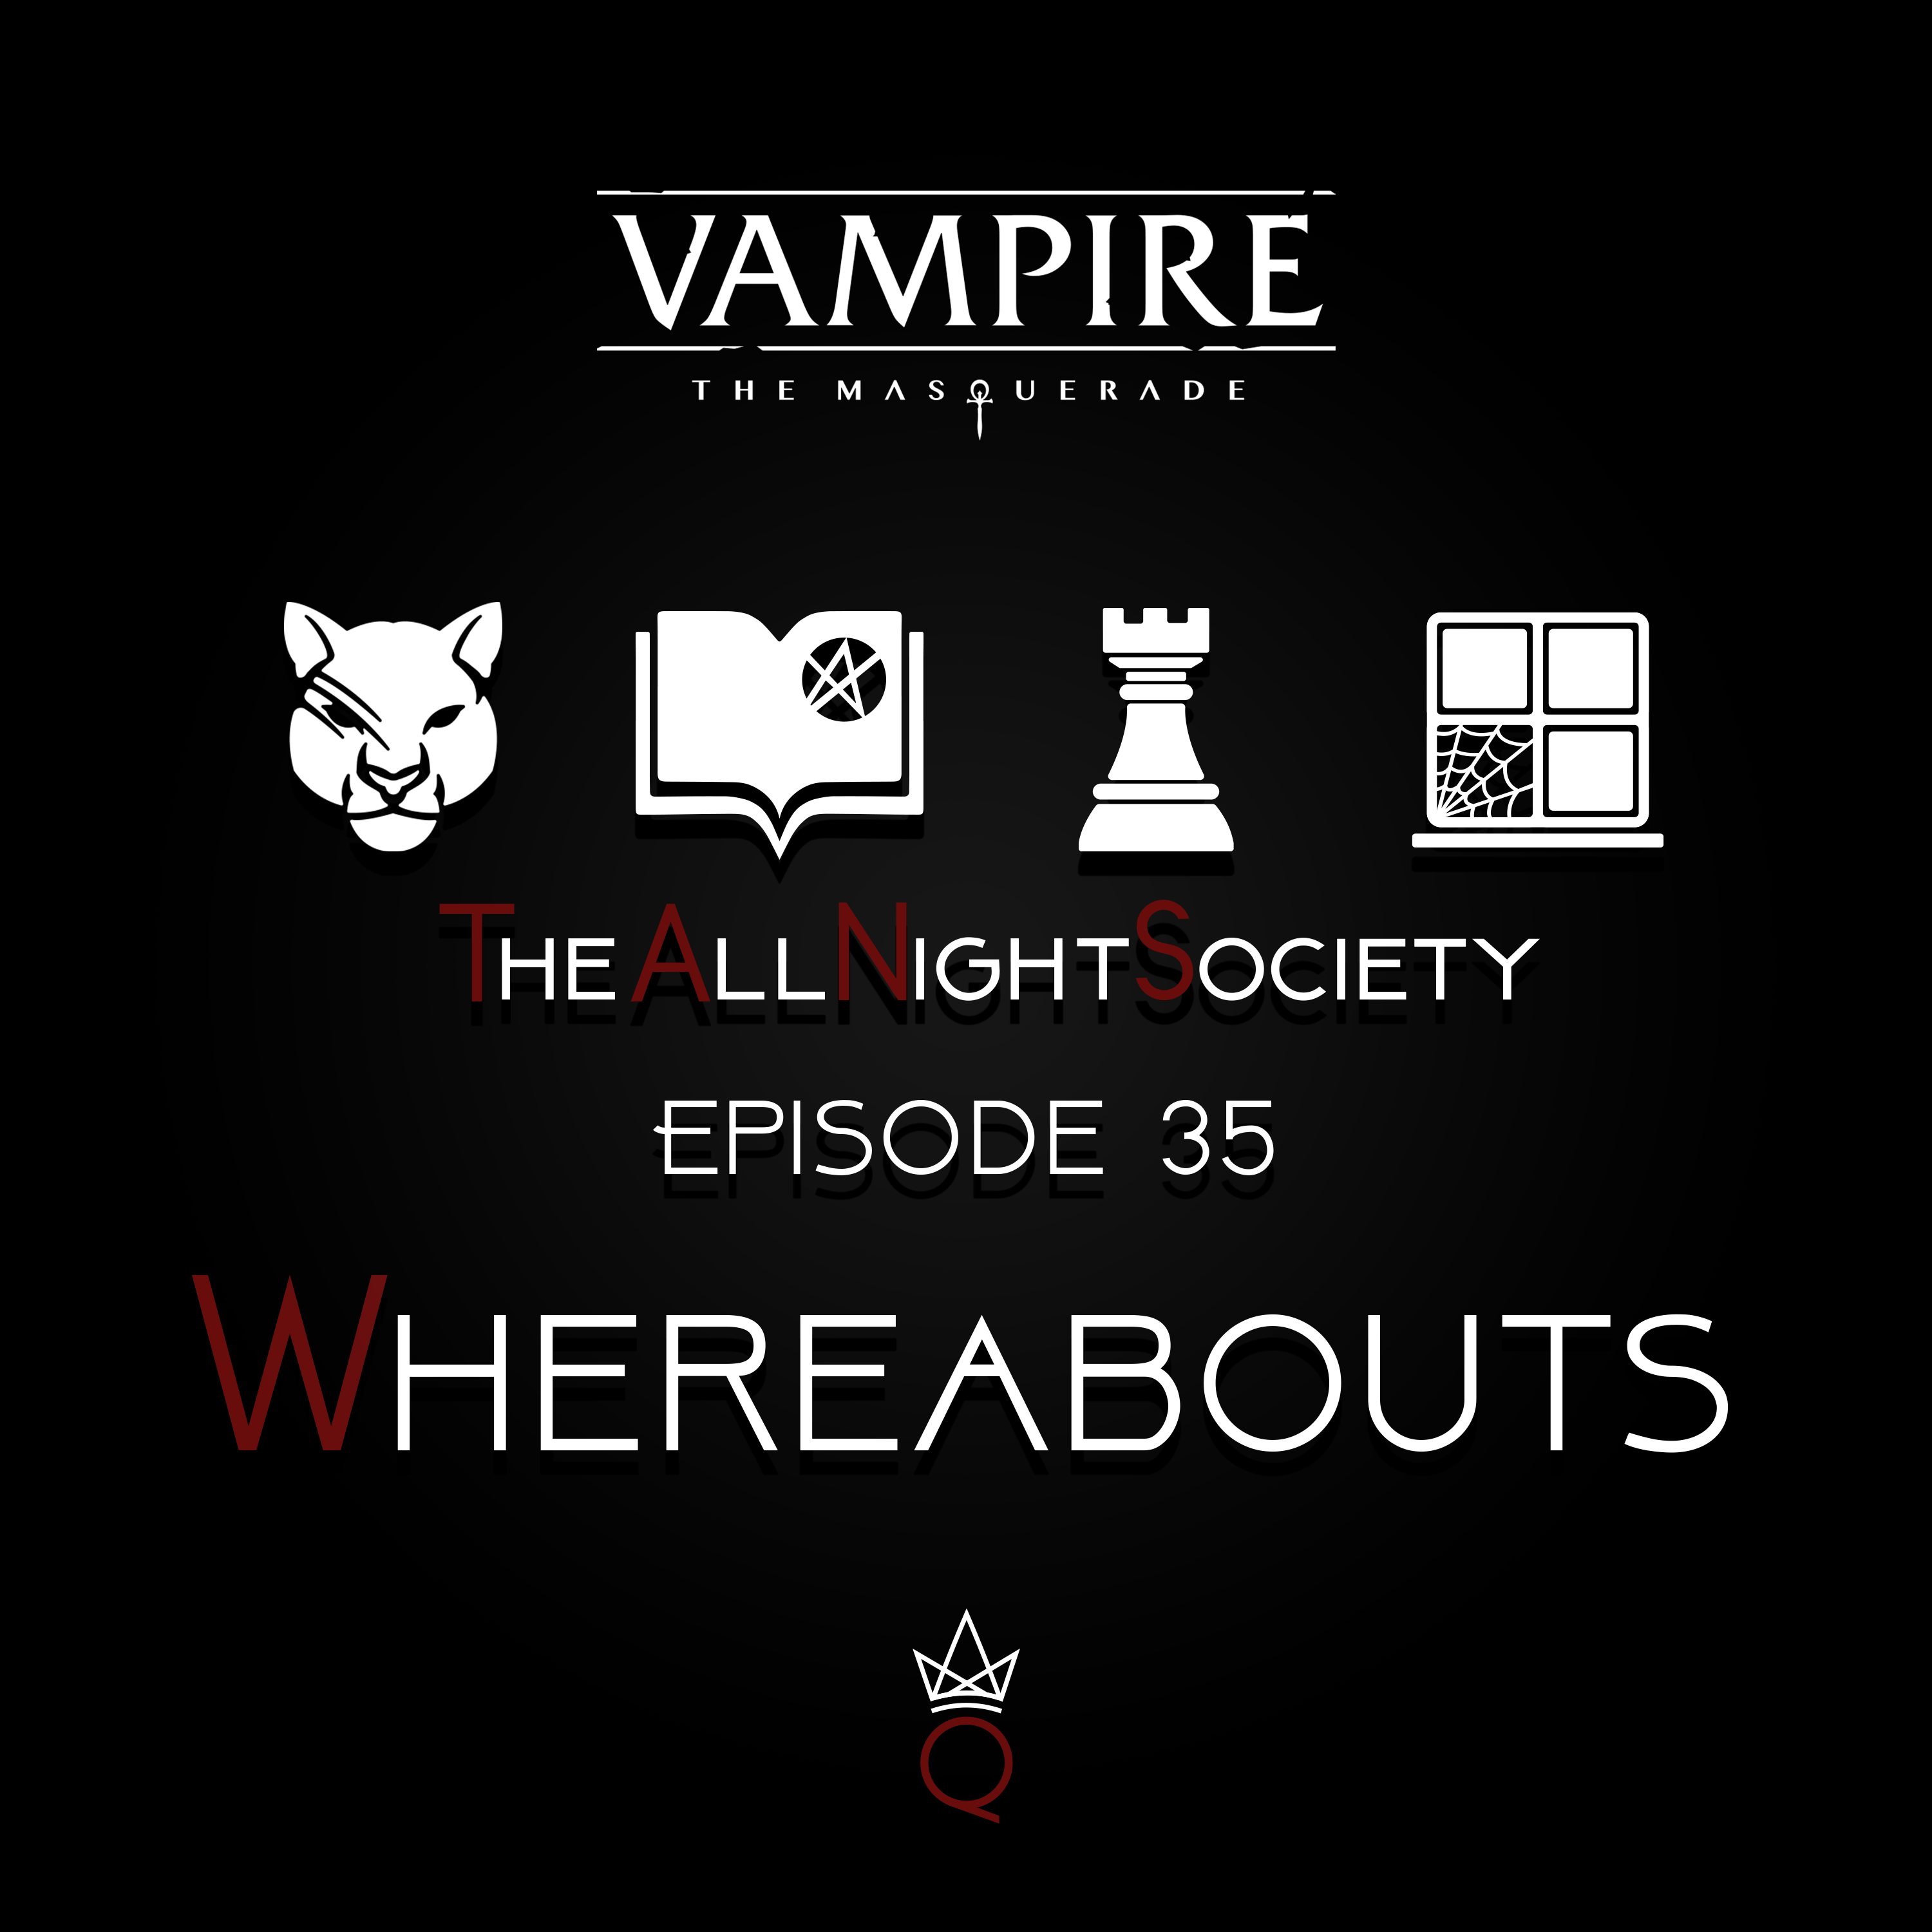 Episode 35 - Whereabouts